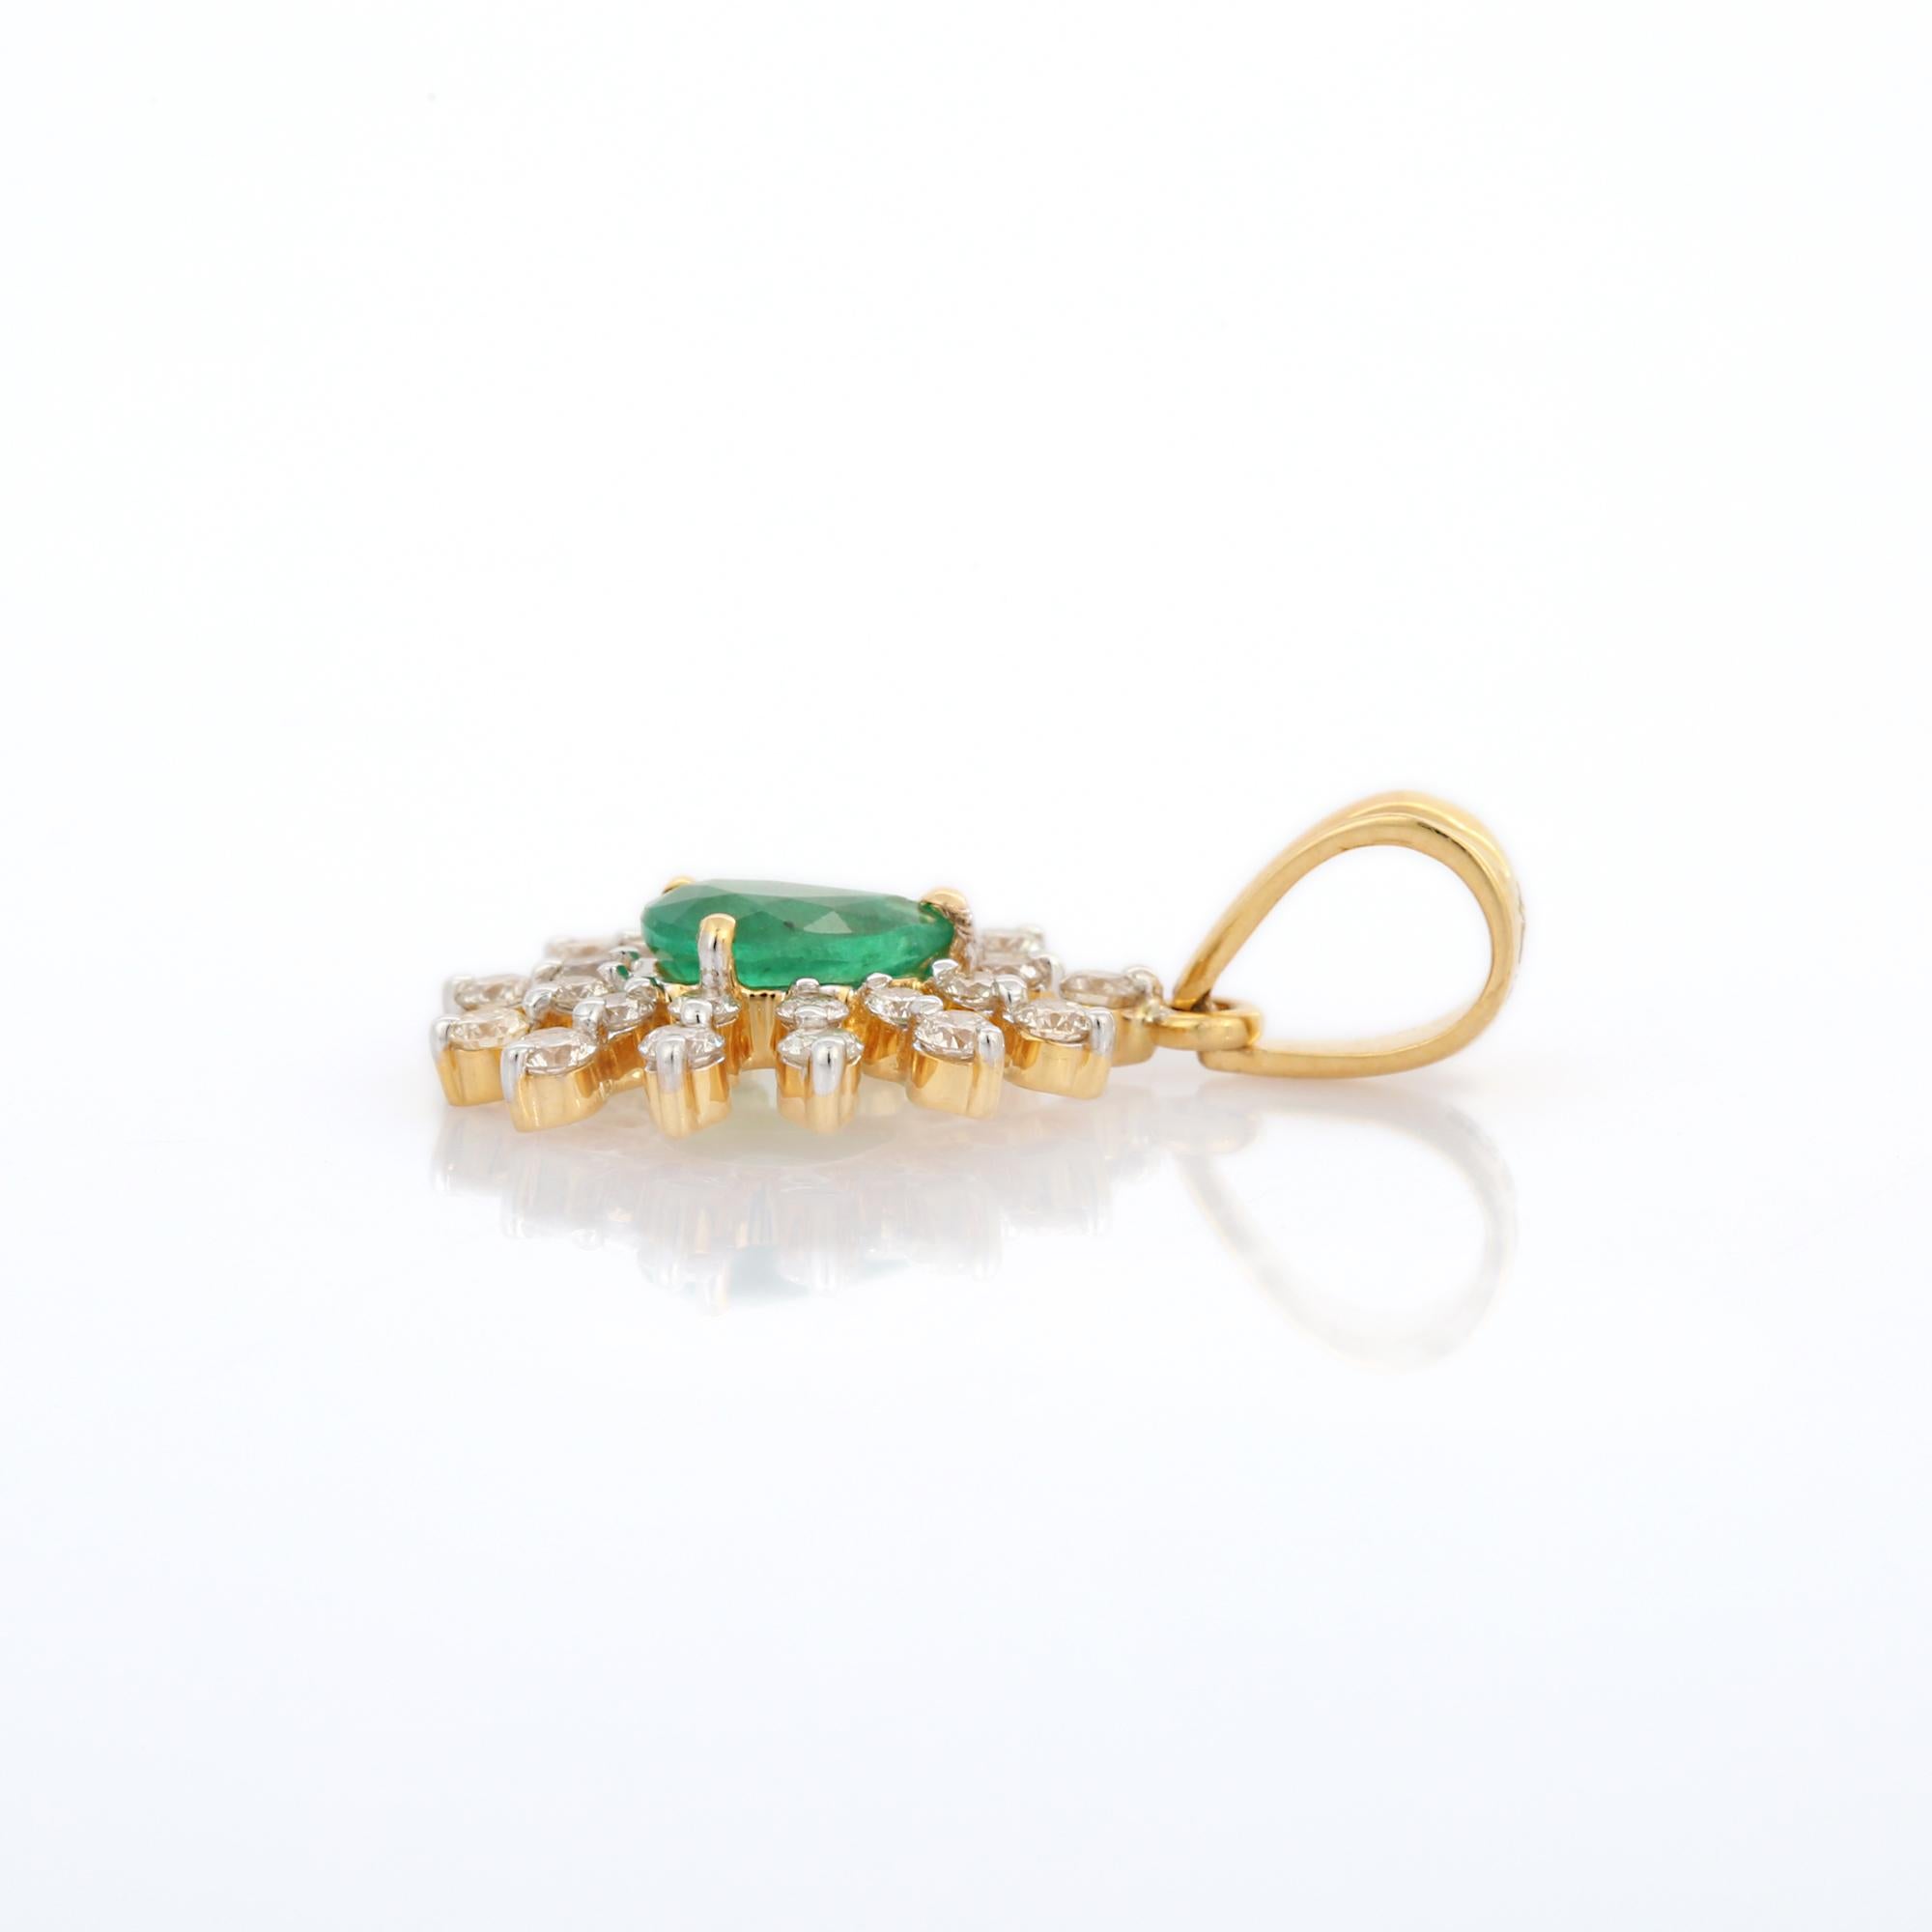 Designer Pear Cut Emerald and Diamond Pendant in 18K Yellow Gold In New Condition For Sale In Houston, TX